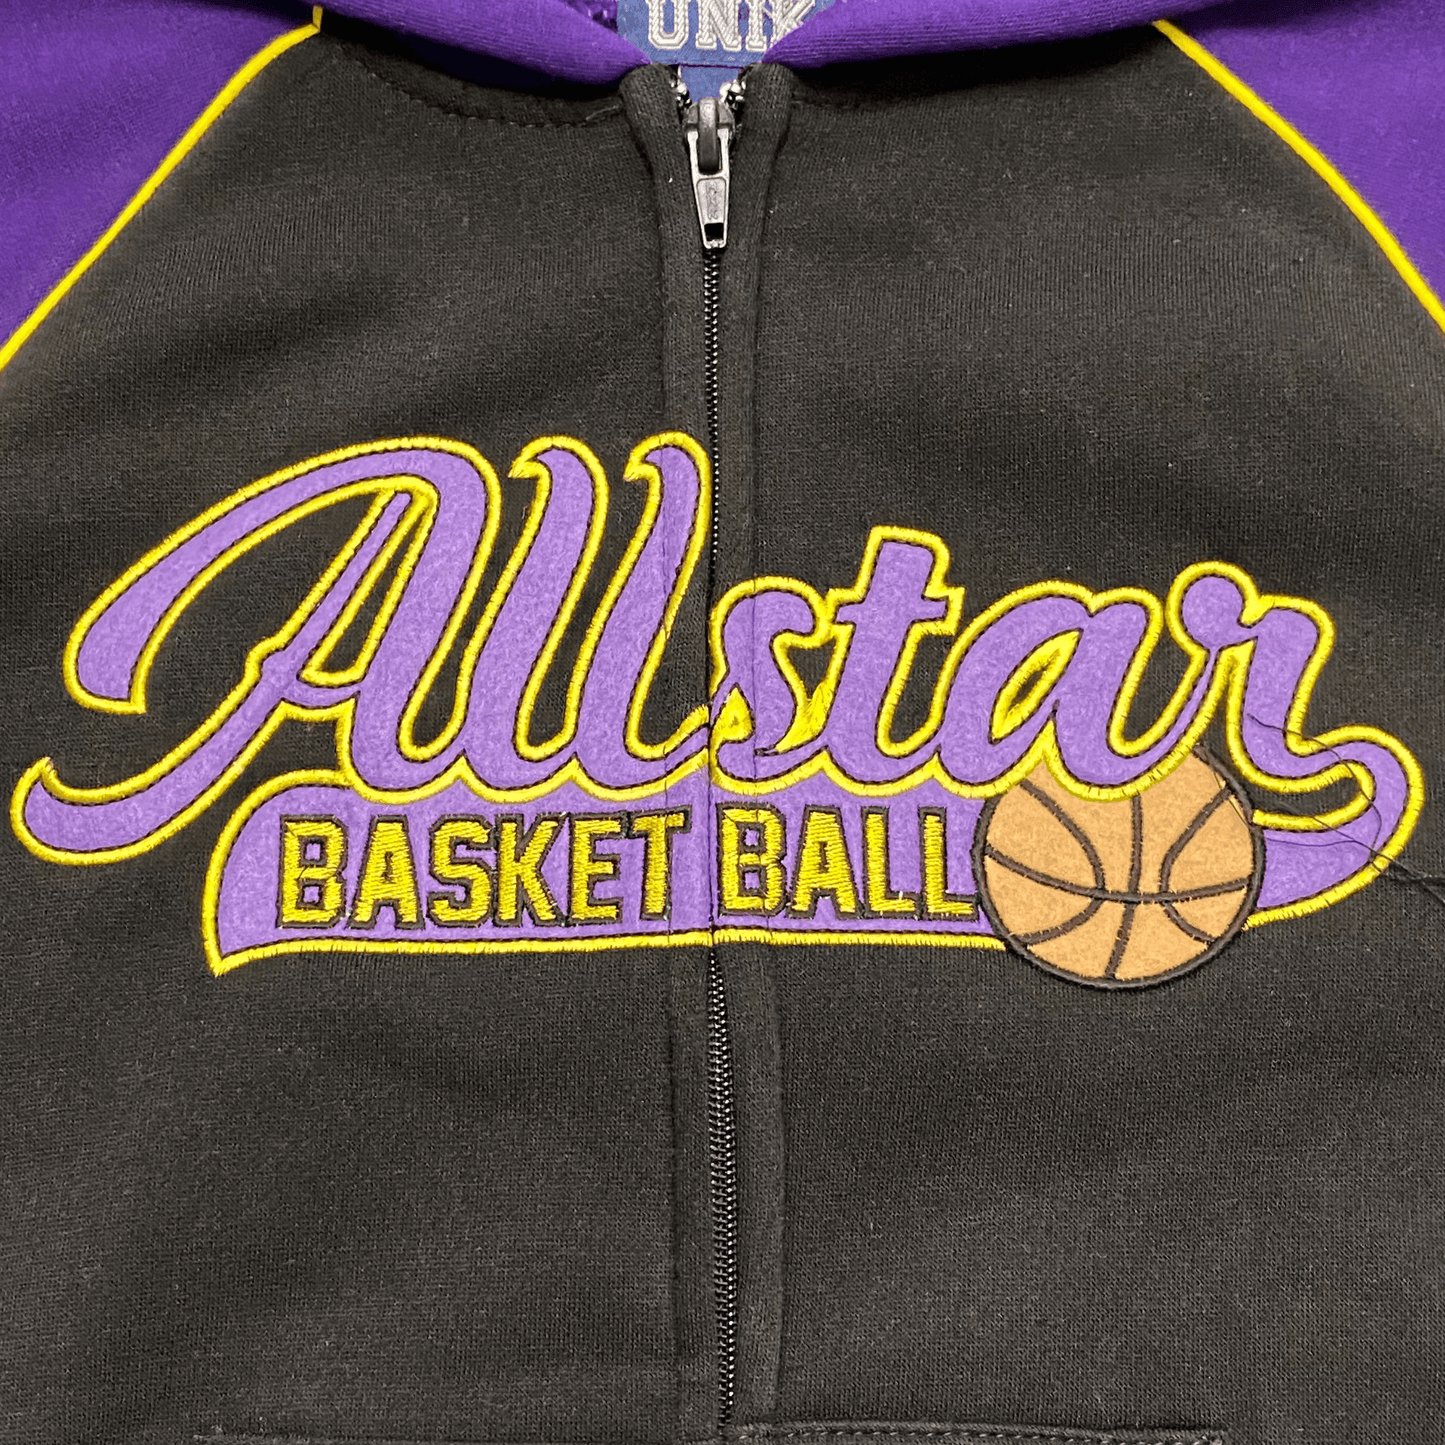 Keep your All-Star feeling and looking like an All-Star in this warm fleece sweat suit.  This black sweat suit features the words "All-Star" and a basketball embroidered on the front.  This sweat suit is perfect for the little baller in your life.